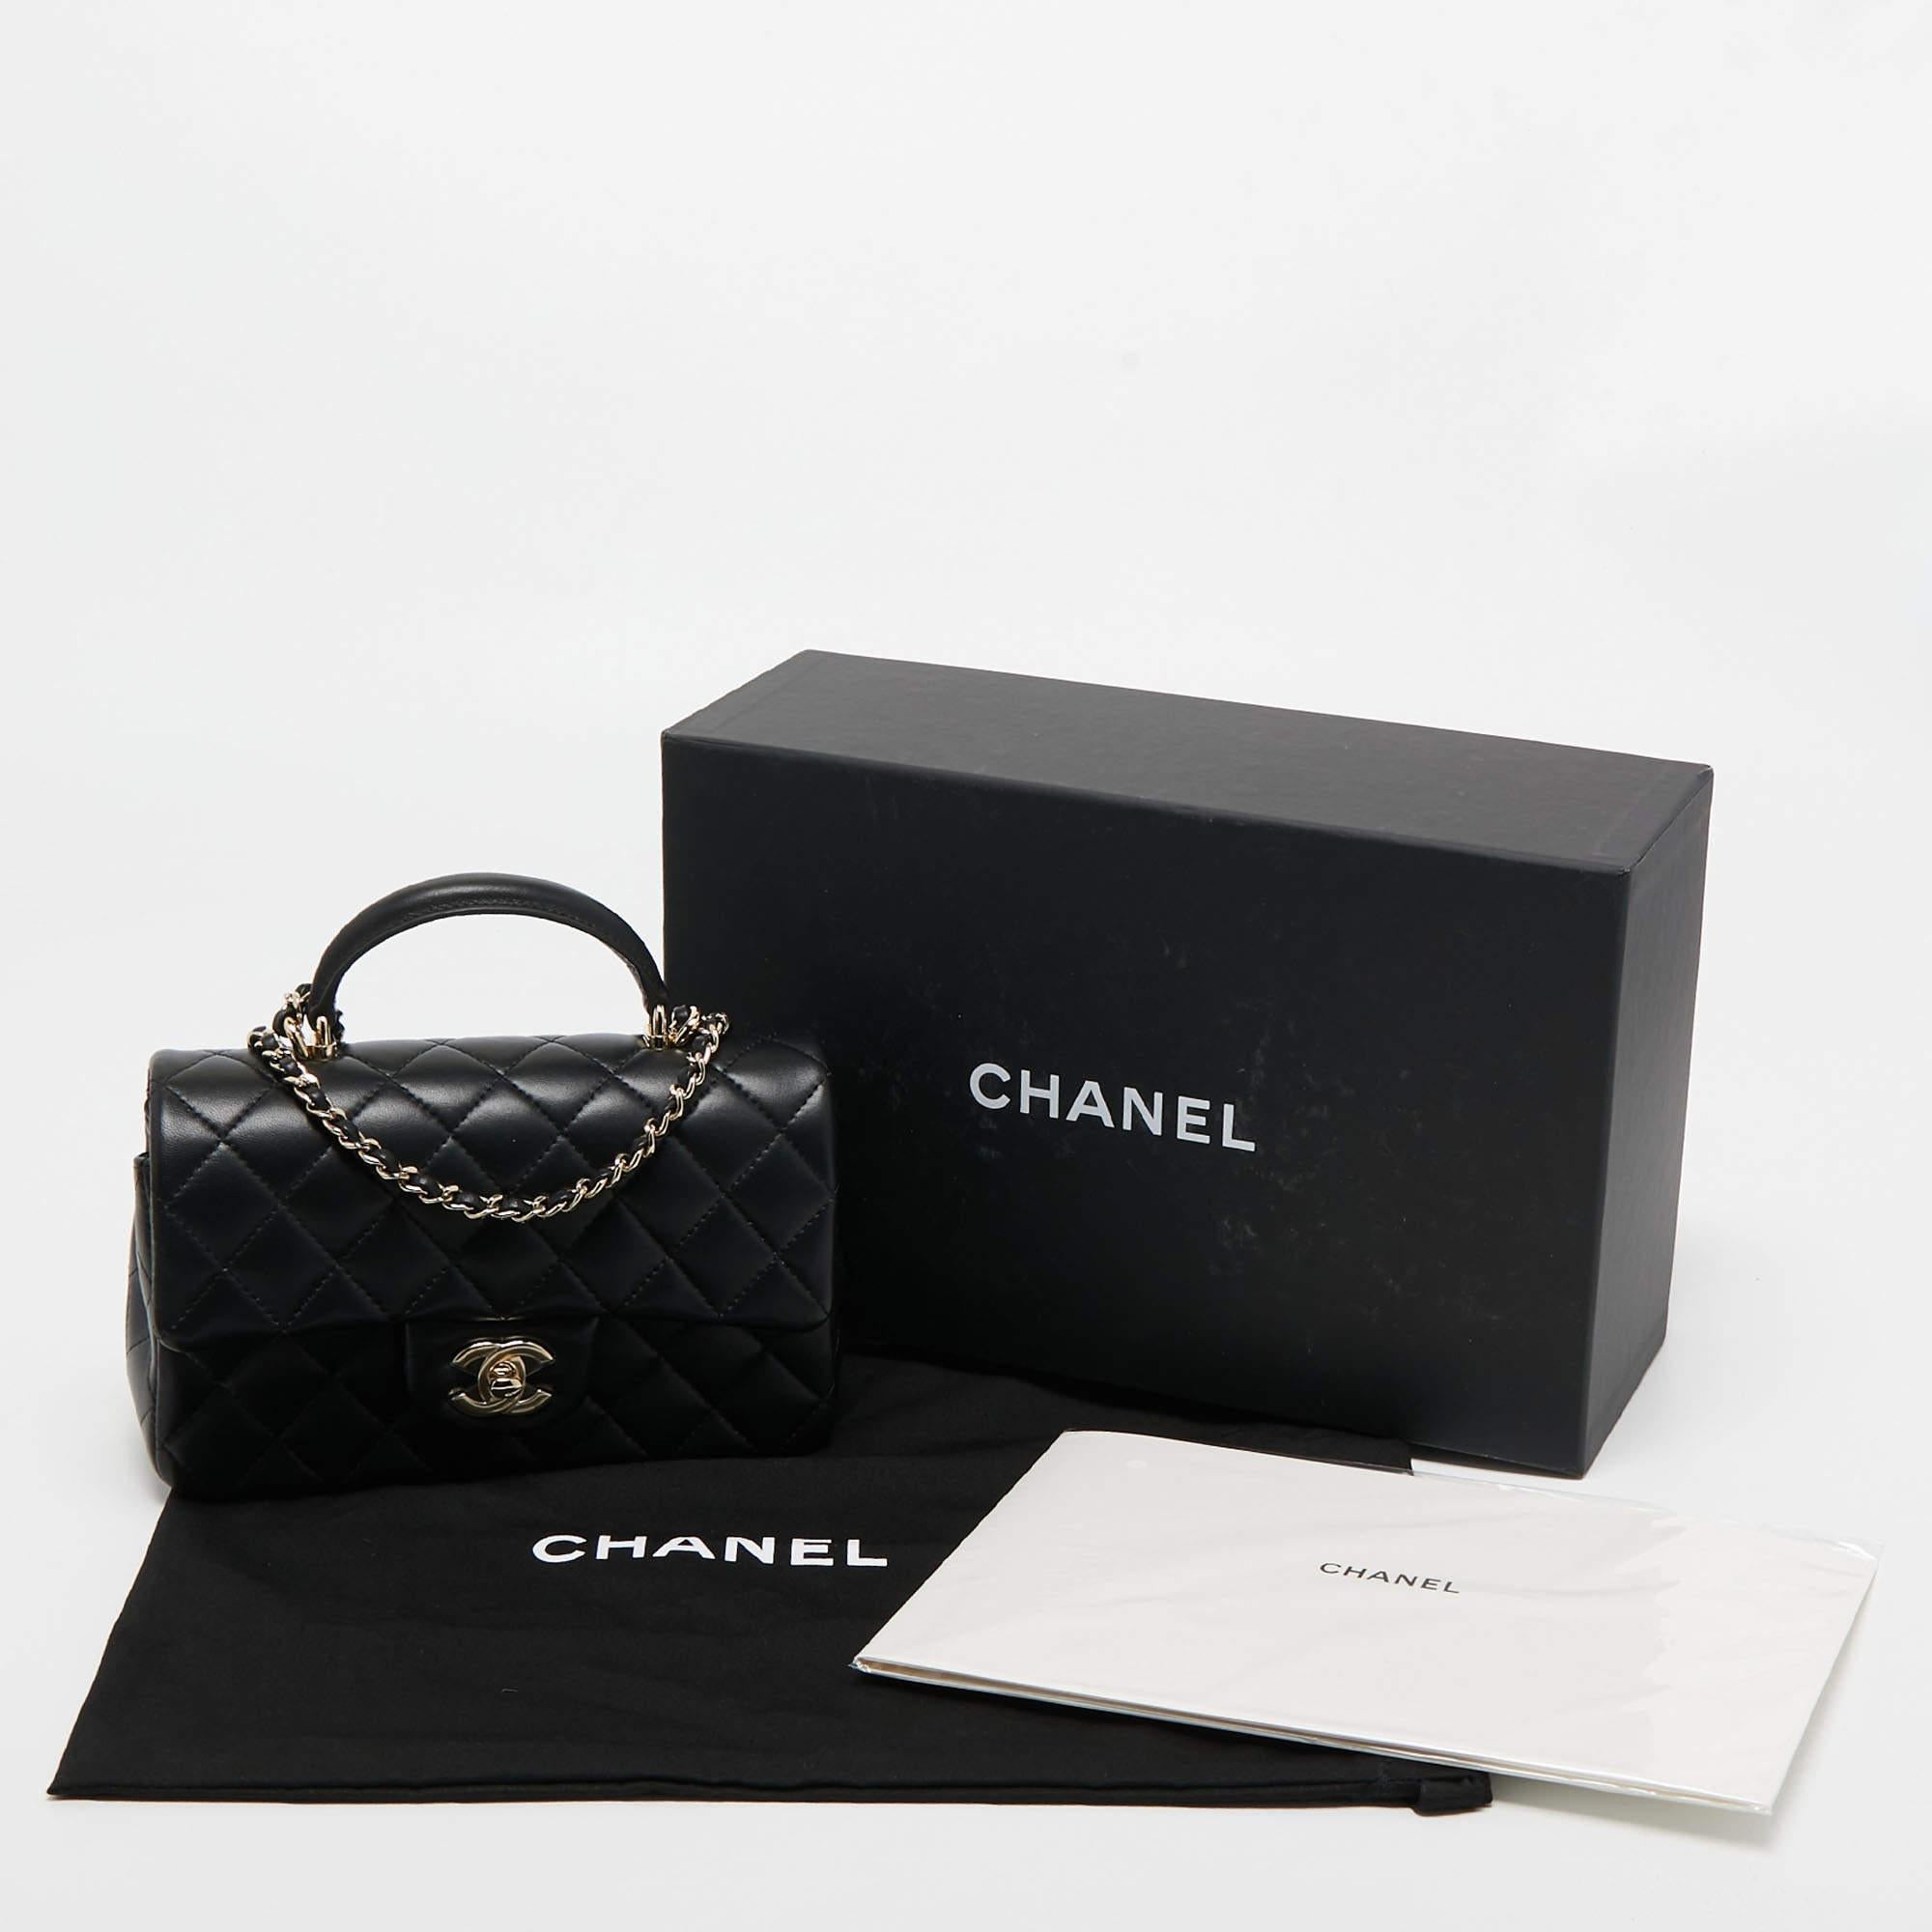 Chanel Black Quilted Leather Mini Rectangular Top Handle Bag 7